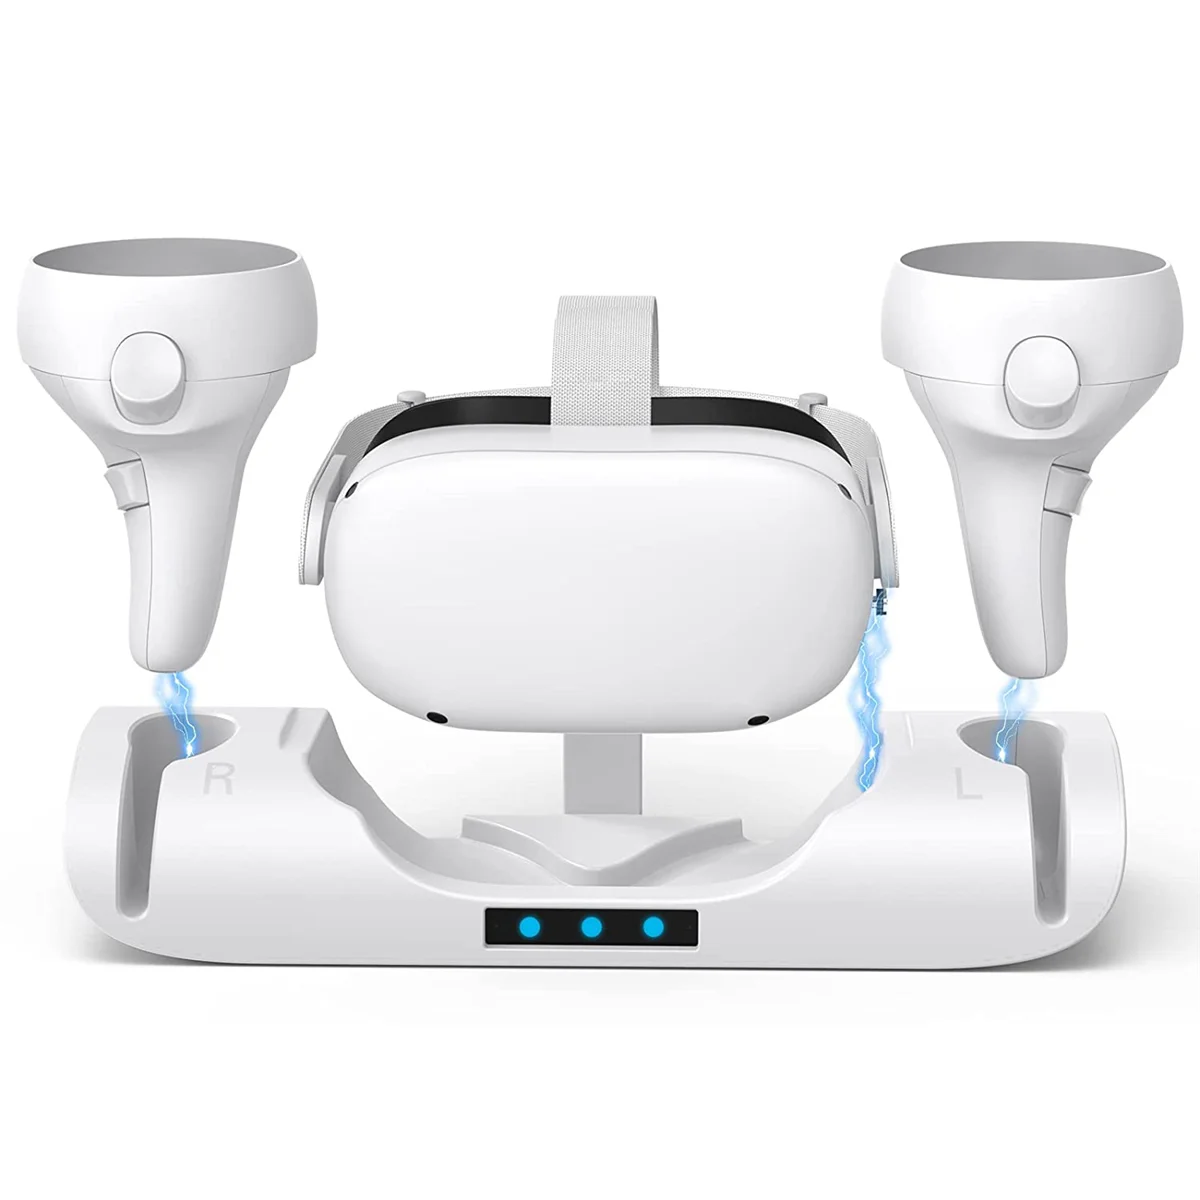 

VR Charging Dock for Meta Quest 2, Charge Controllers and Headset Simultaneously, VR Charger Station Accessories